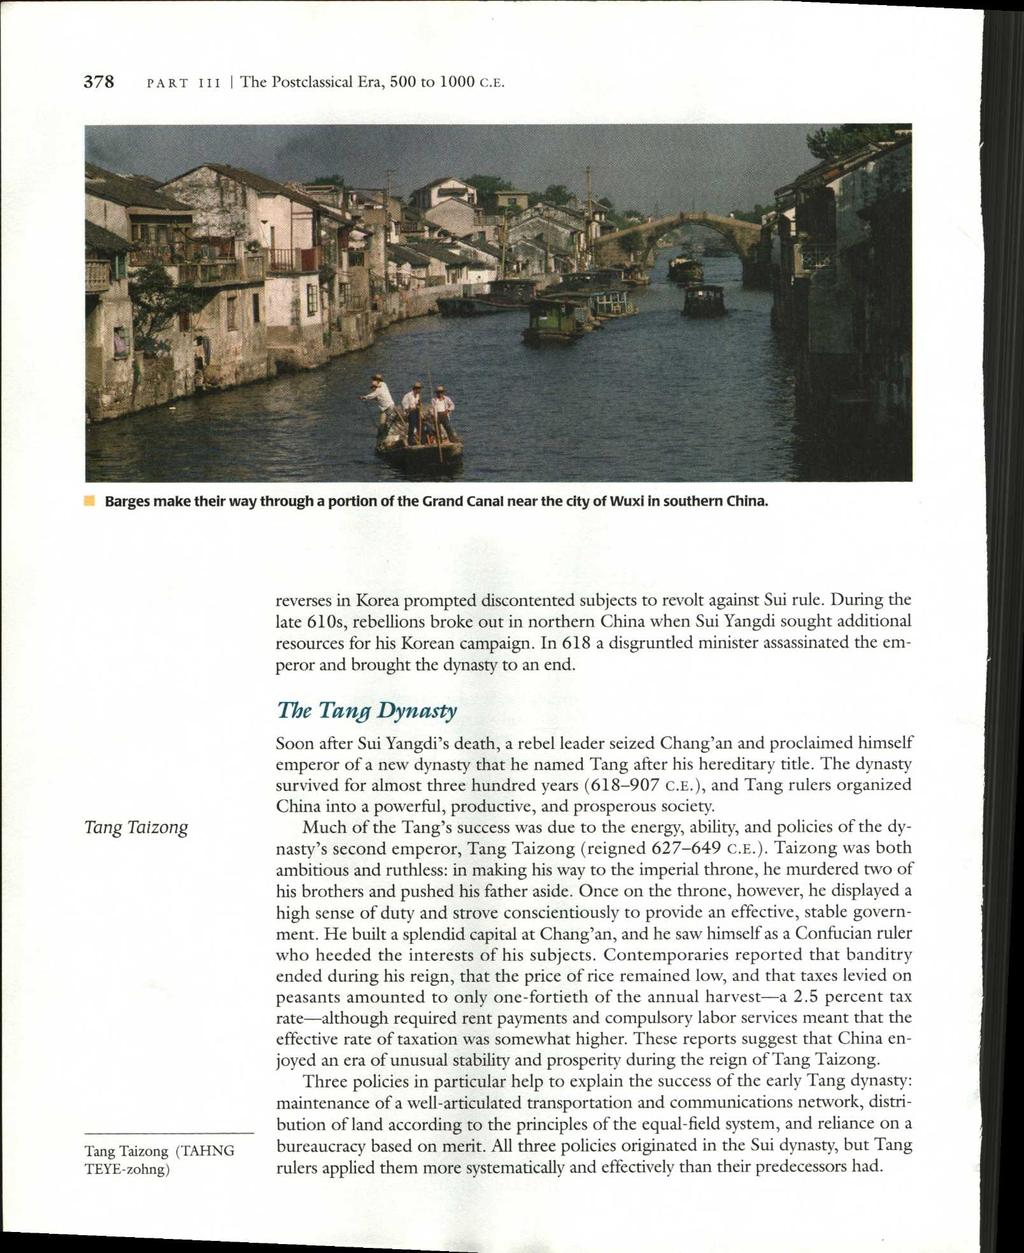 378 PART III I The Postclassical Era, 500 to 1000 C.E. Barges make their way through a portion of the Grand Canal near the city of Wuxi in southern China.